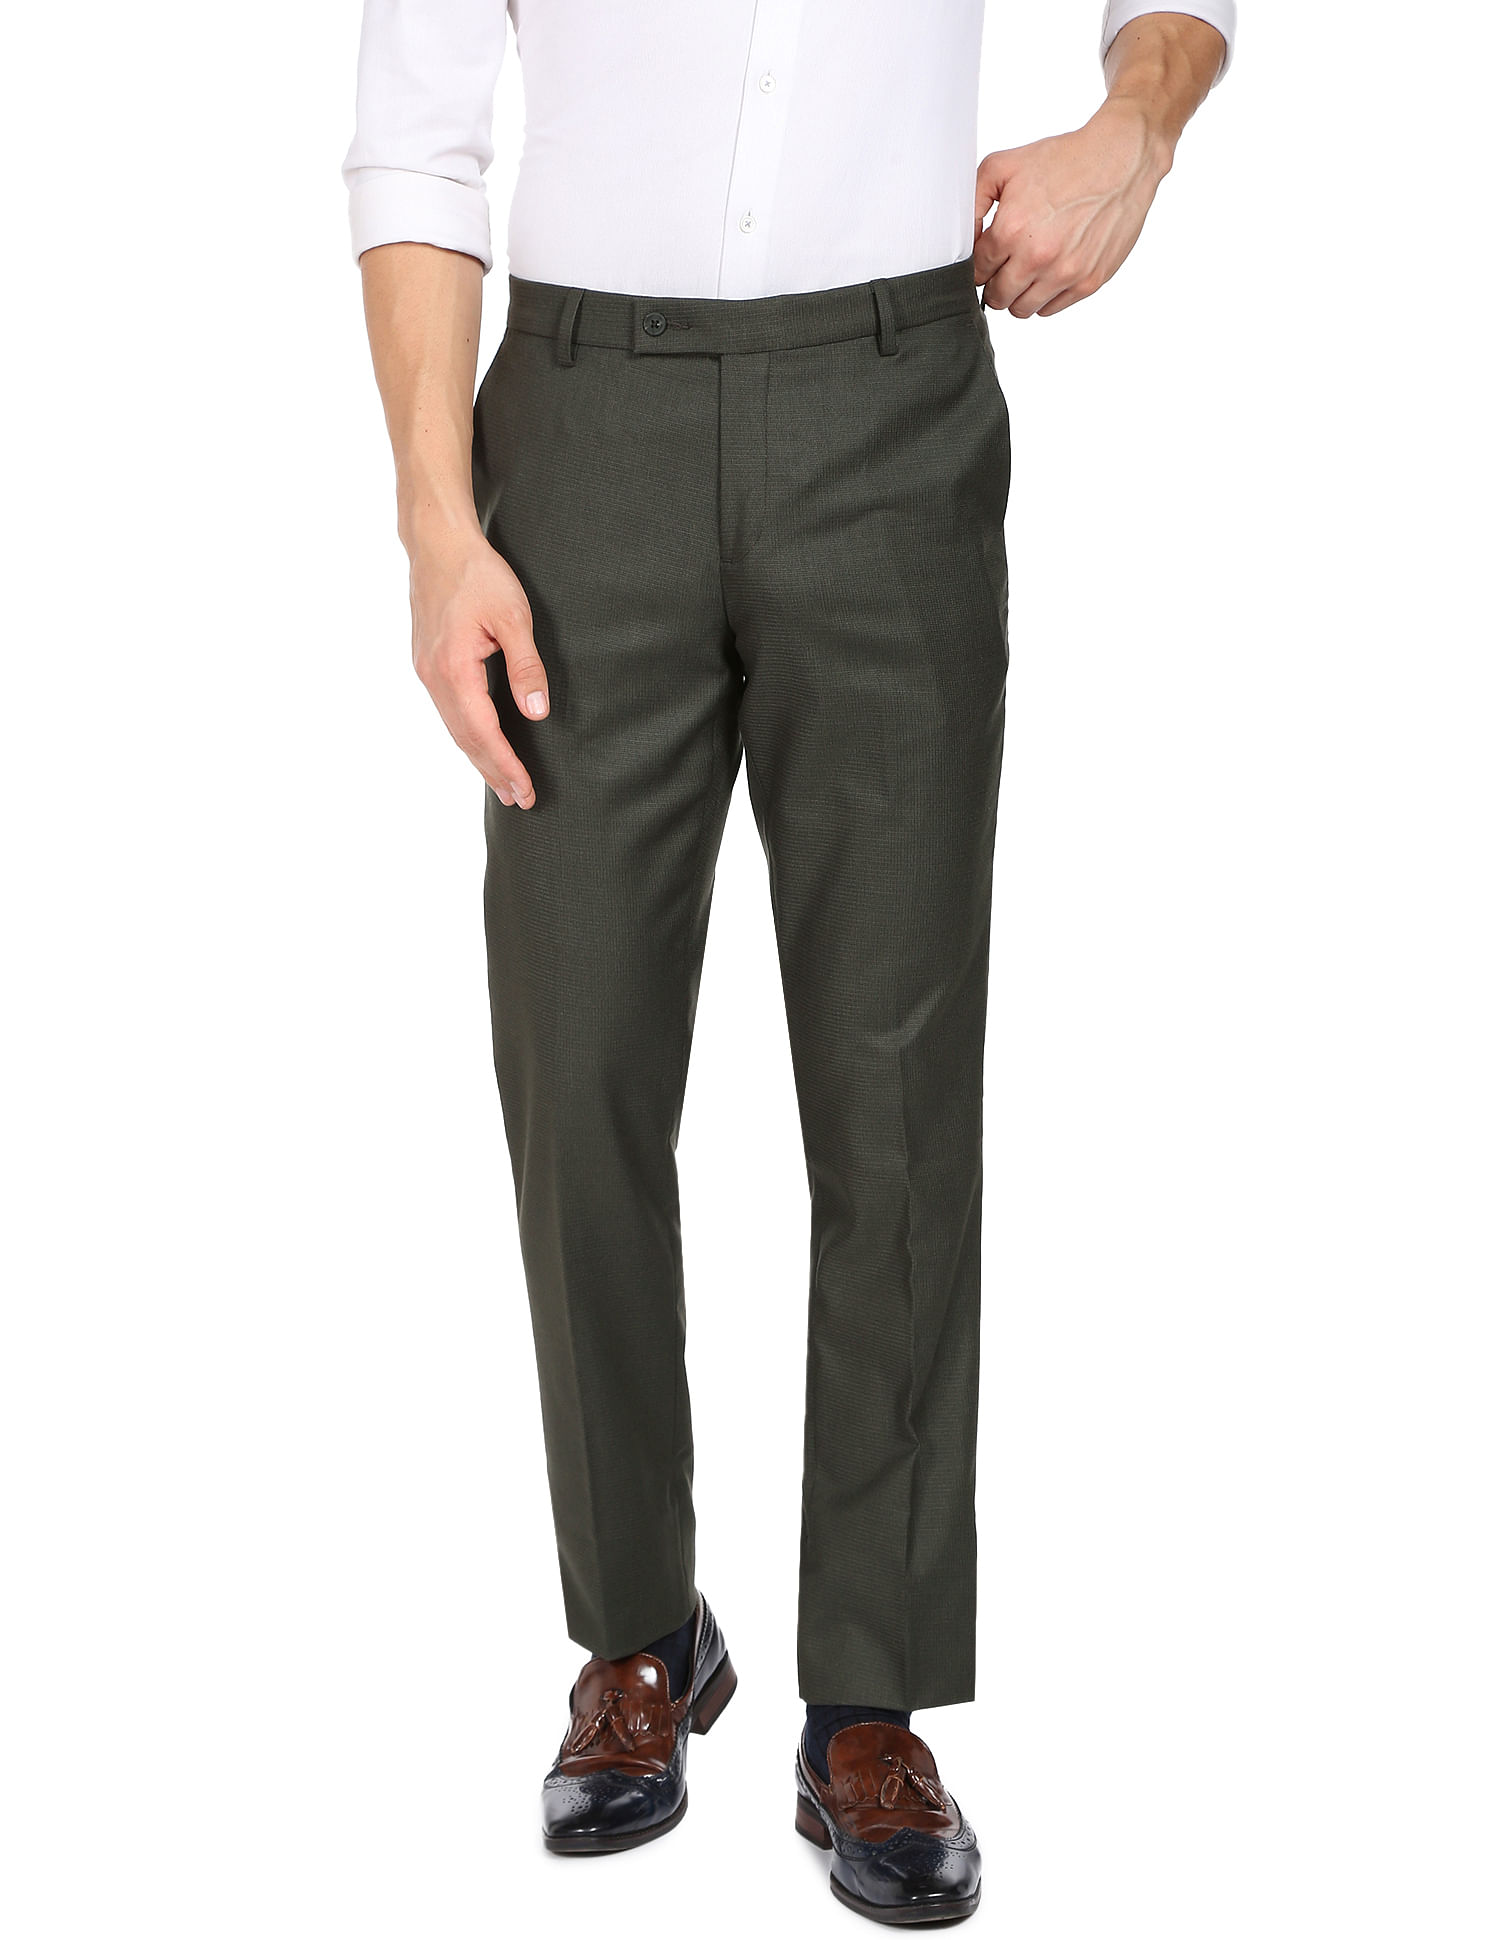 Buy Green Trousers & Pants for Men by HENRY & SMITH Online | Ajio.com